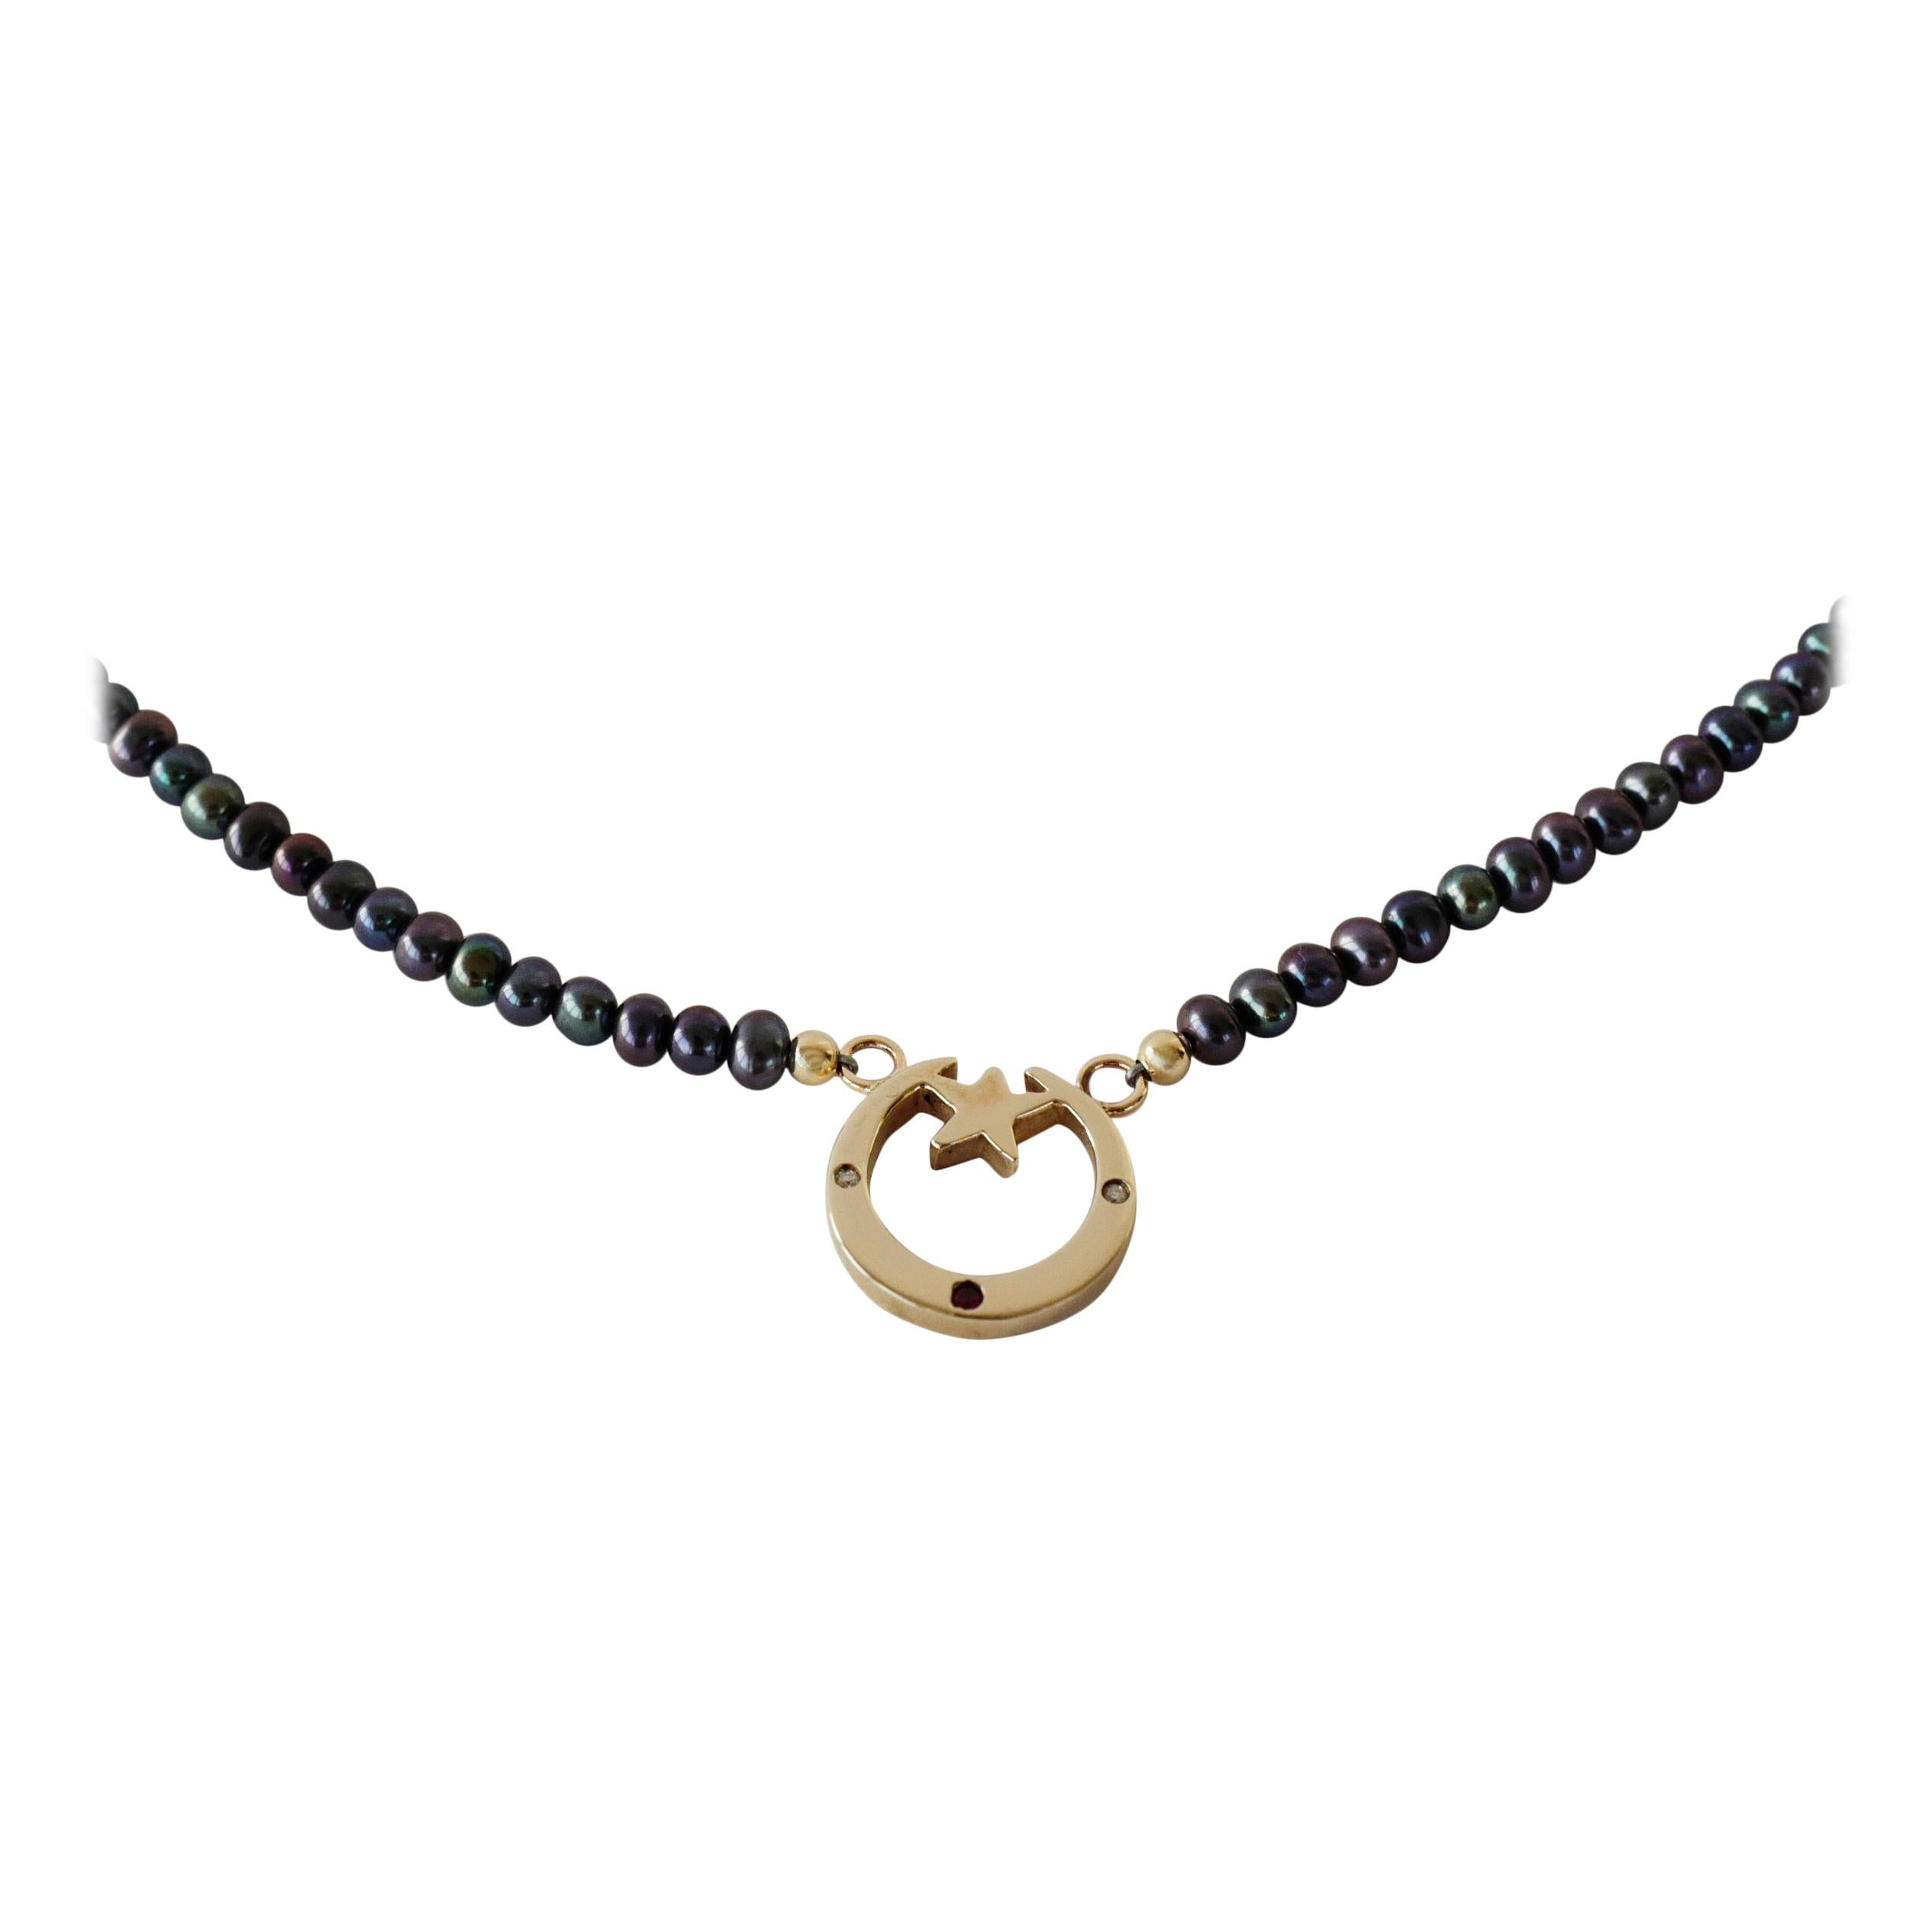 Crescent Moon Necklace Black Pearl White Diamond Ruby Dauphin

Black sweet water Pearl necklace is 16